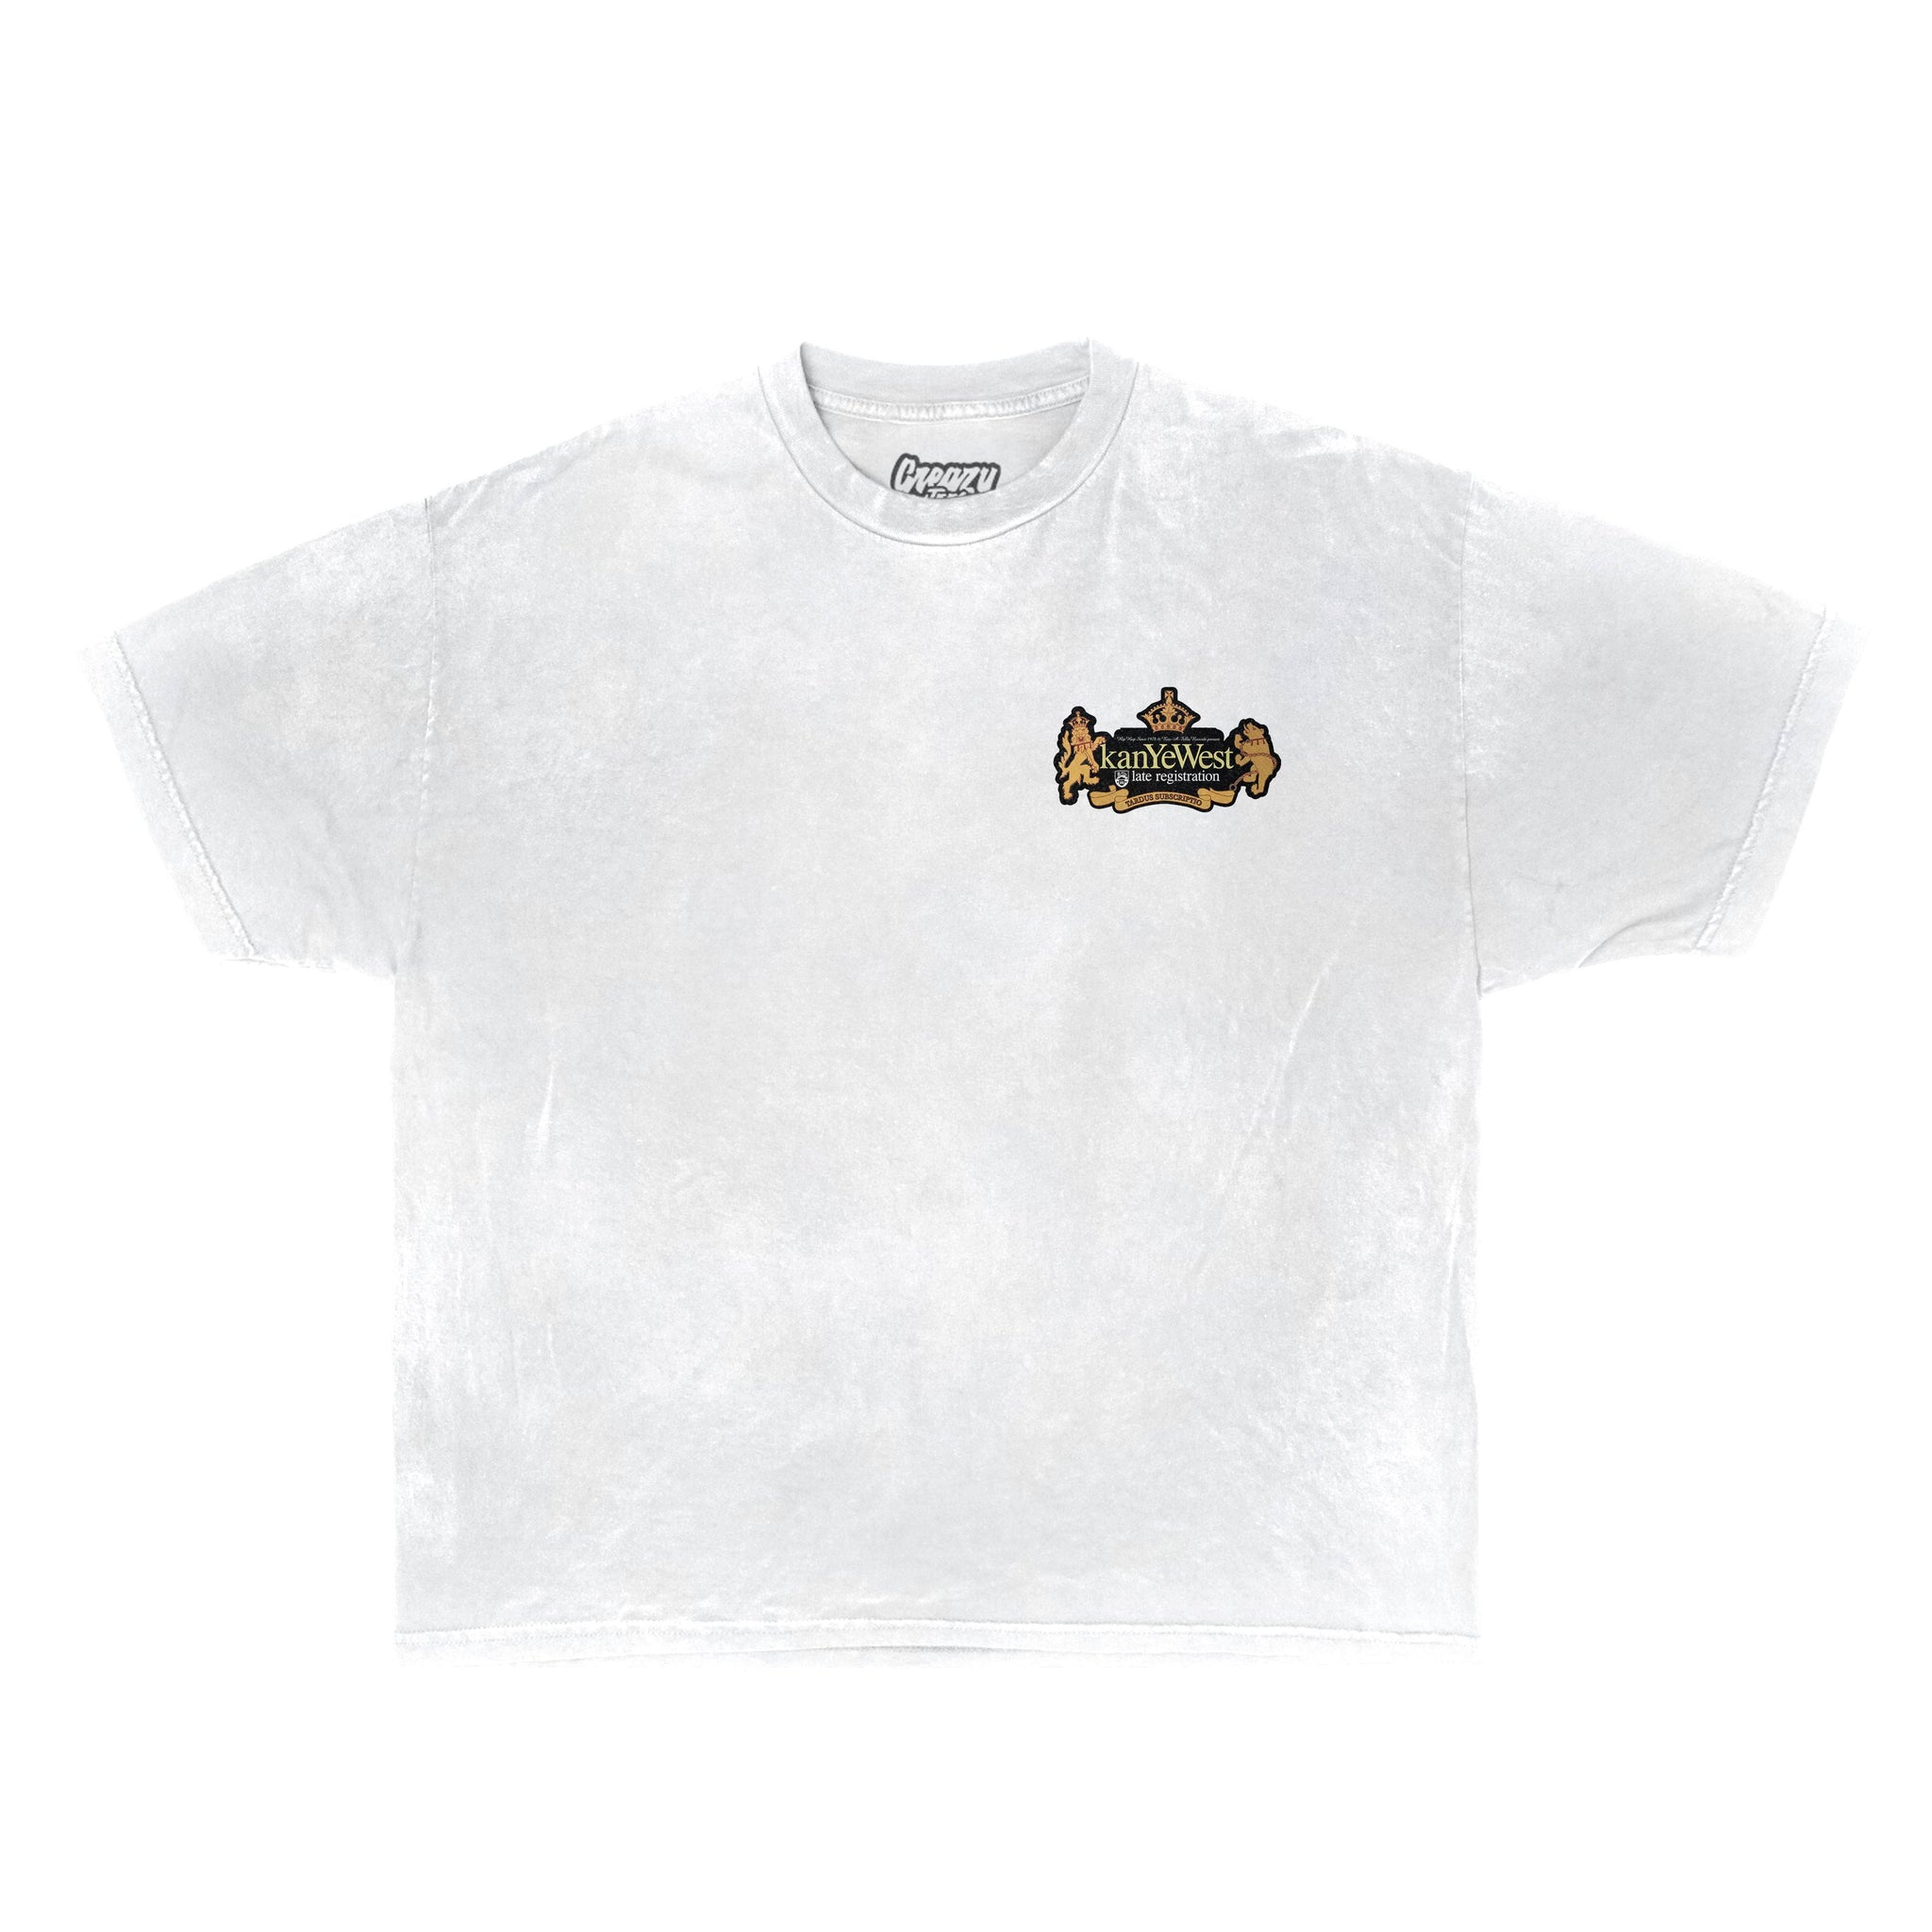 The Late Registration Pack – Greazy Tees